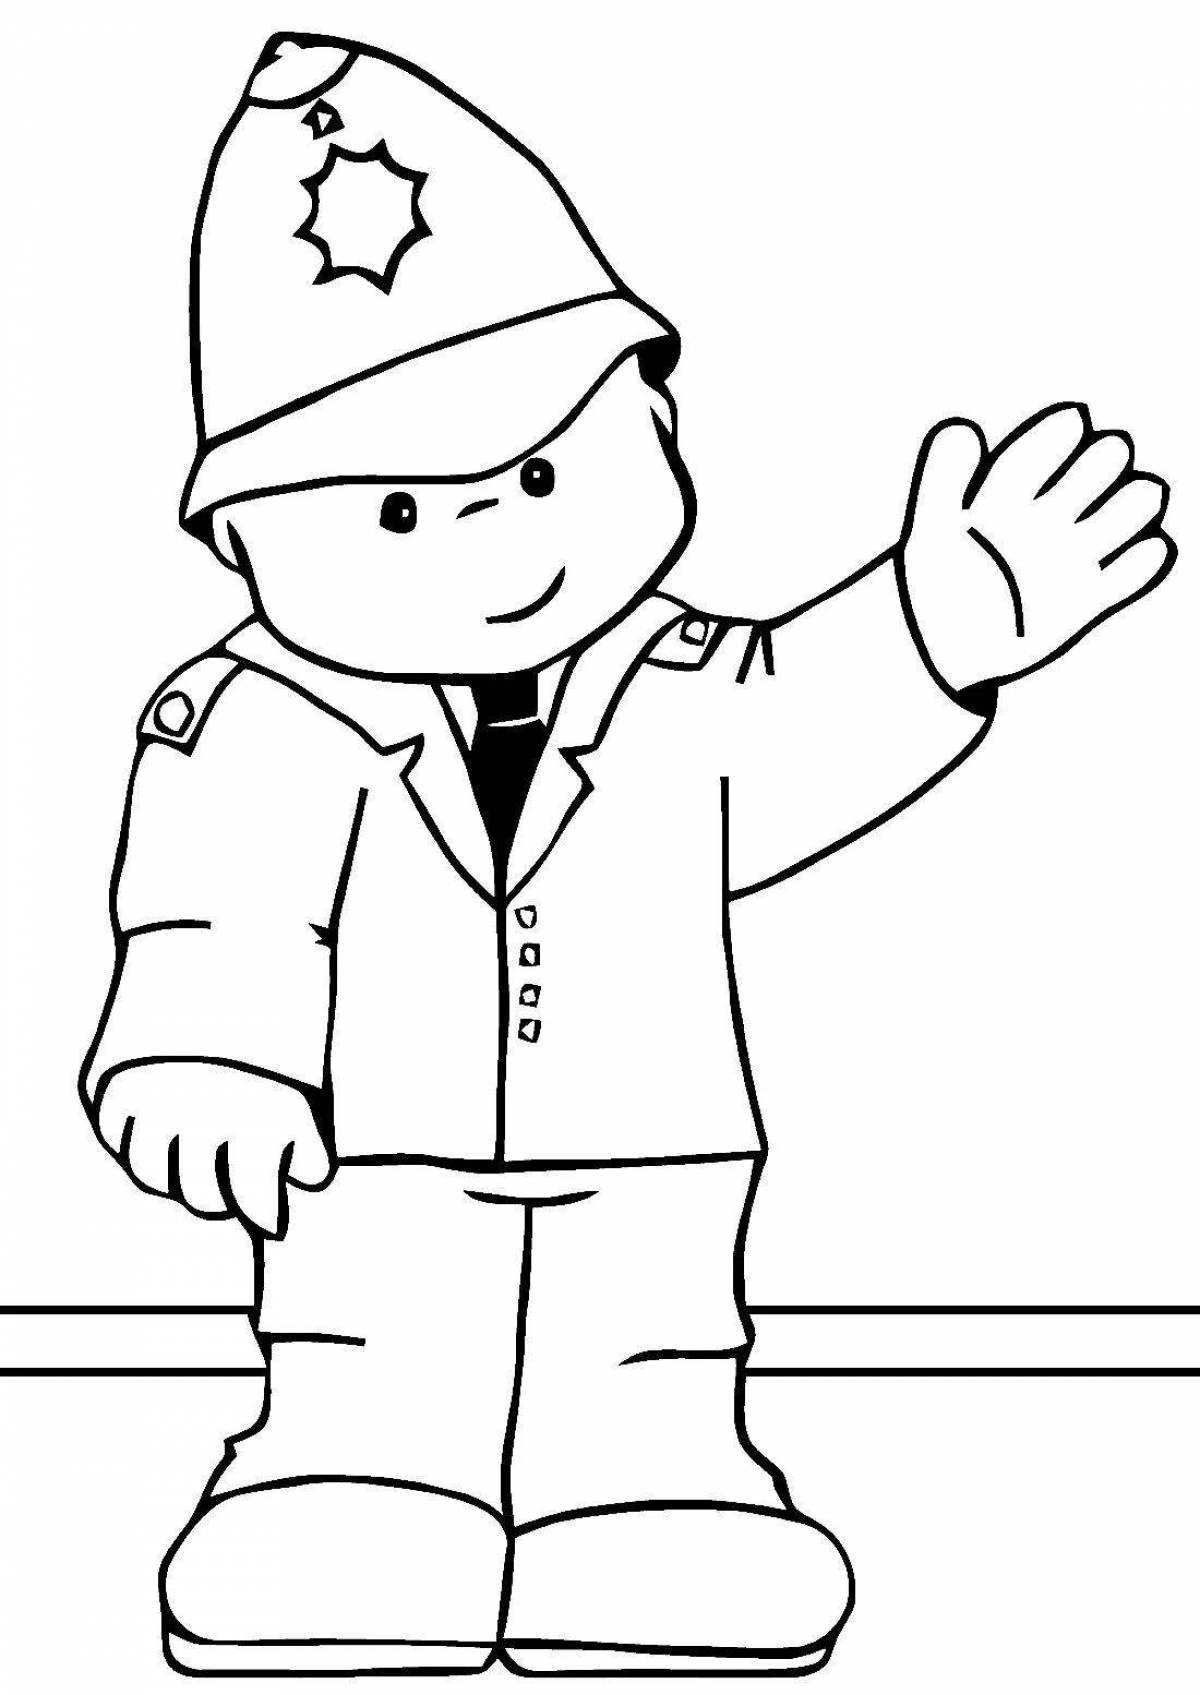 Coloring book cute soldier for children 3-4 years old